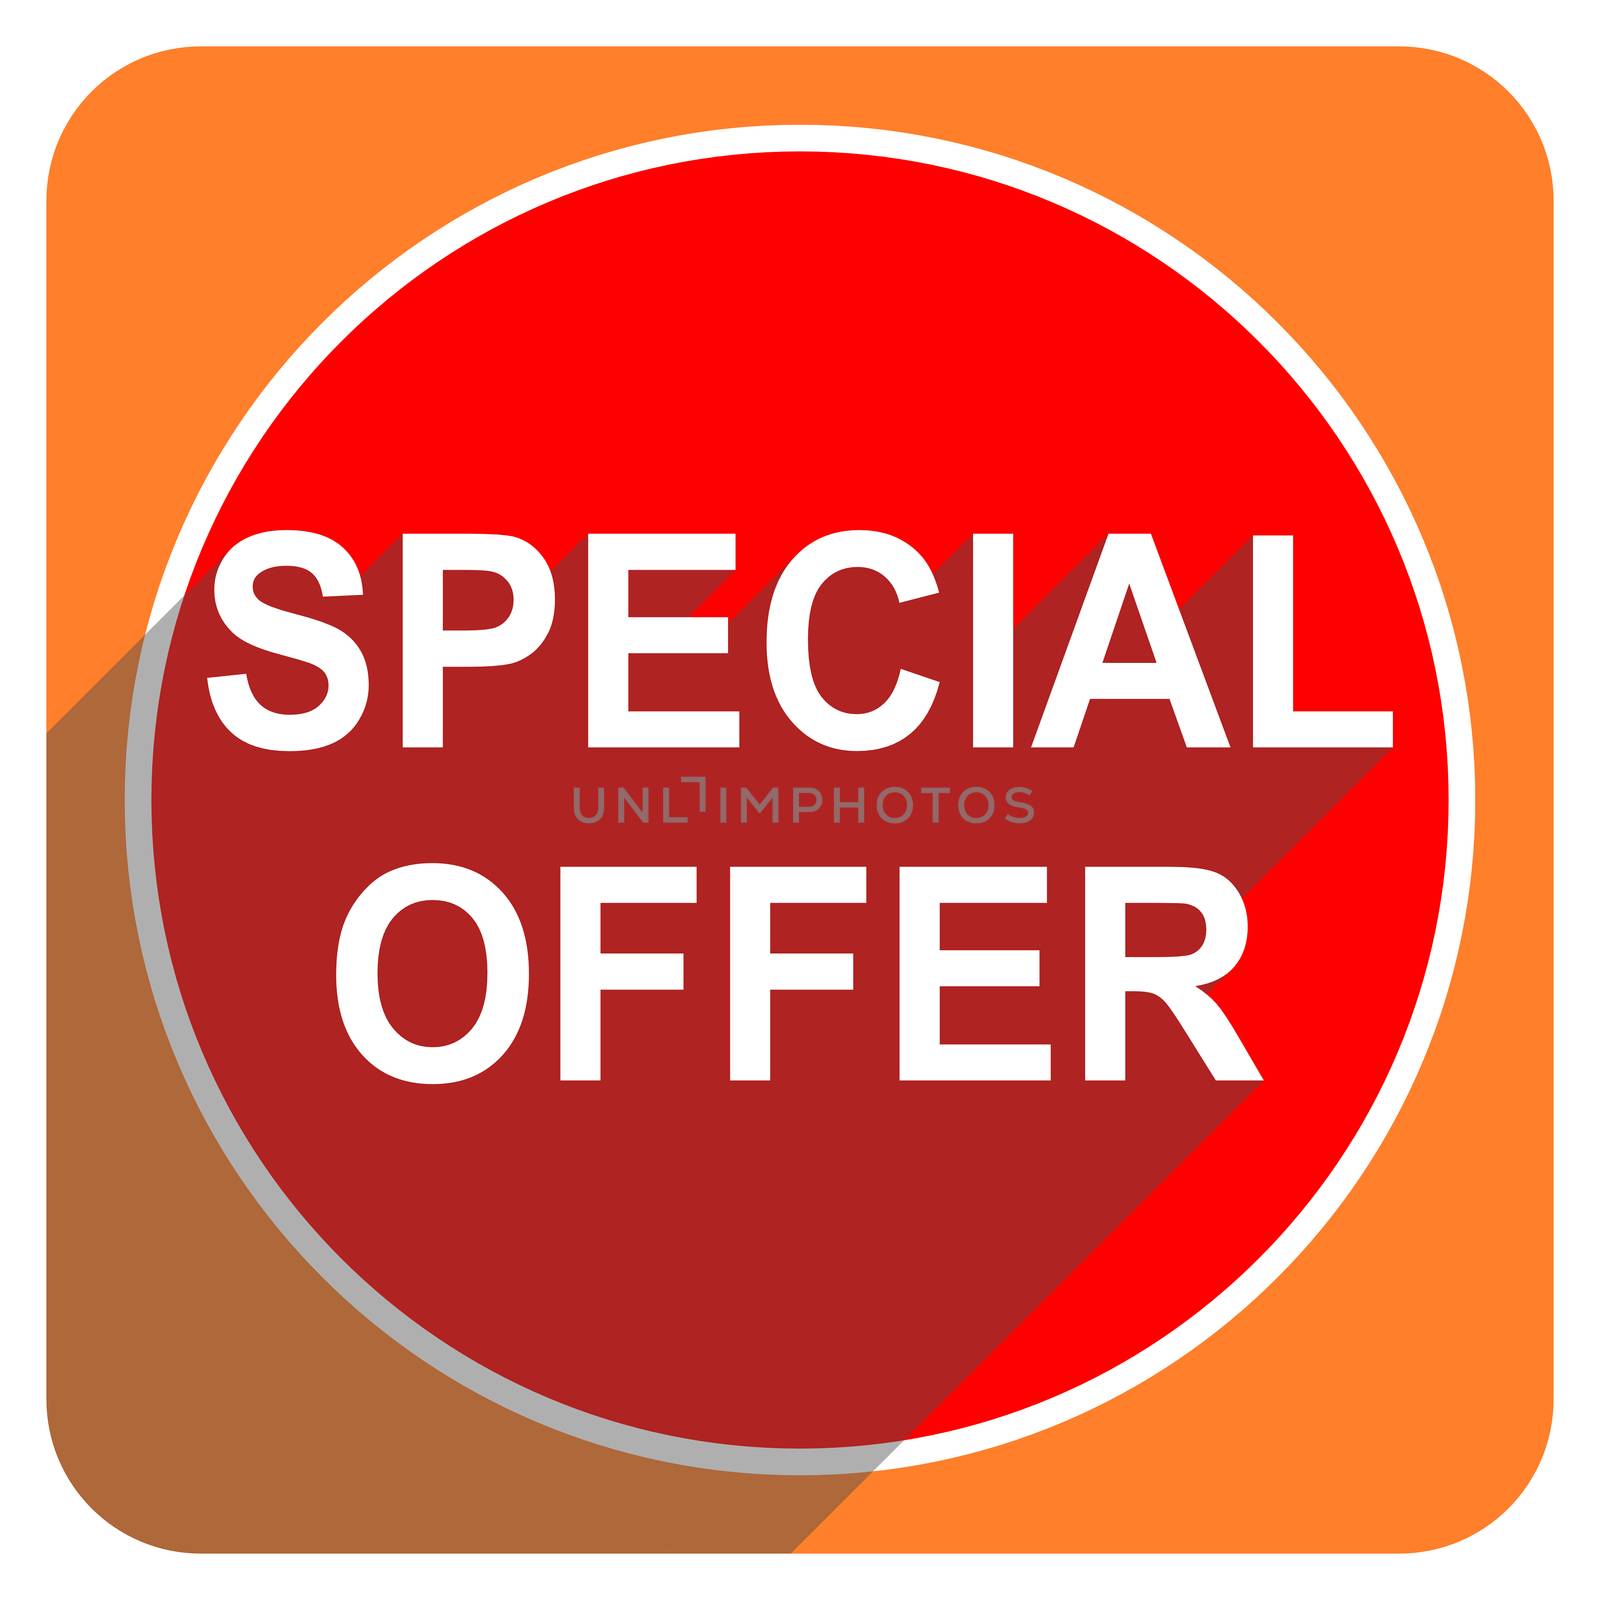 special offer red flat icon isolated